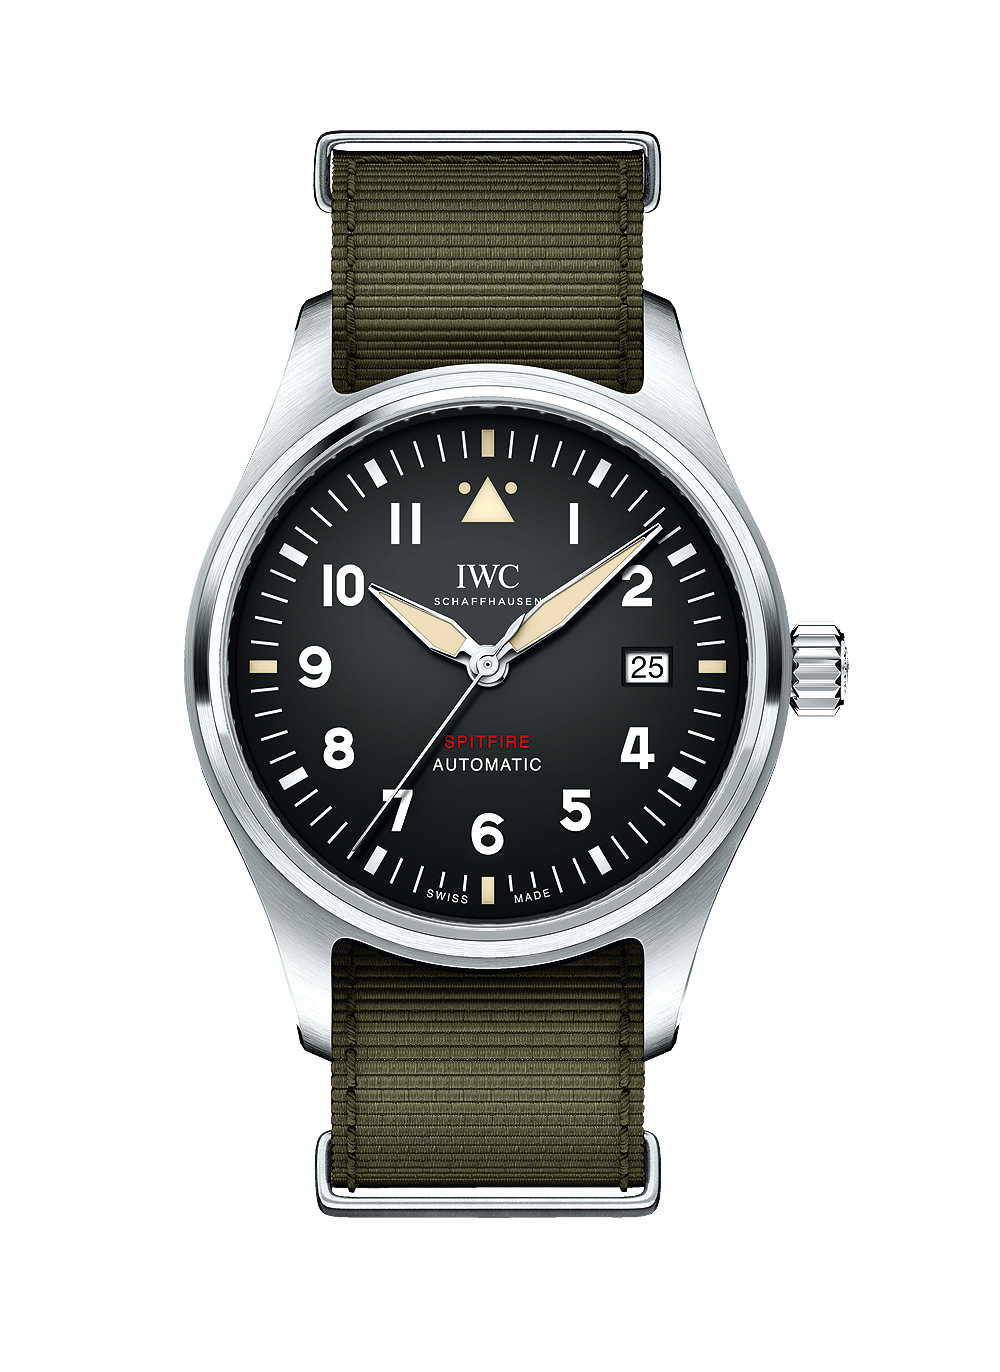 IWC Pilot's Watch Automatic Spitfire - front